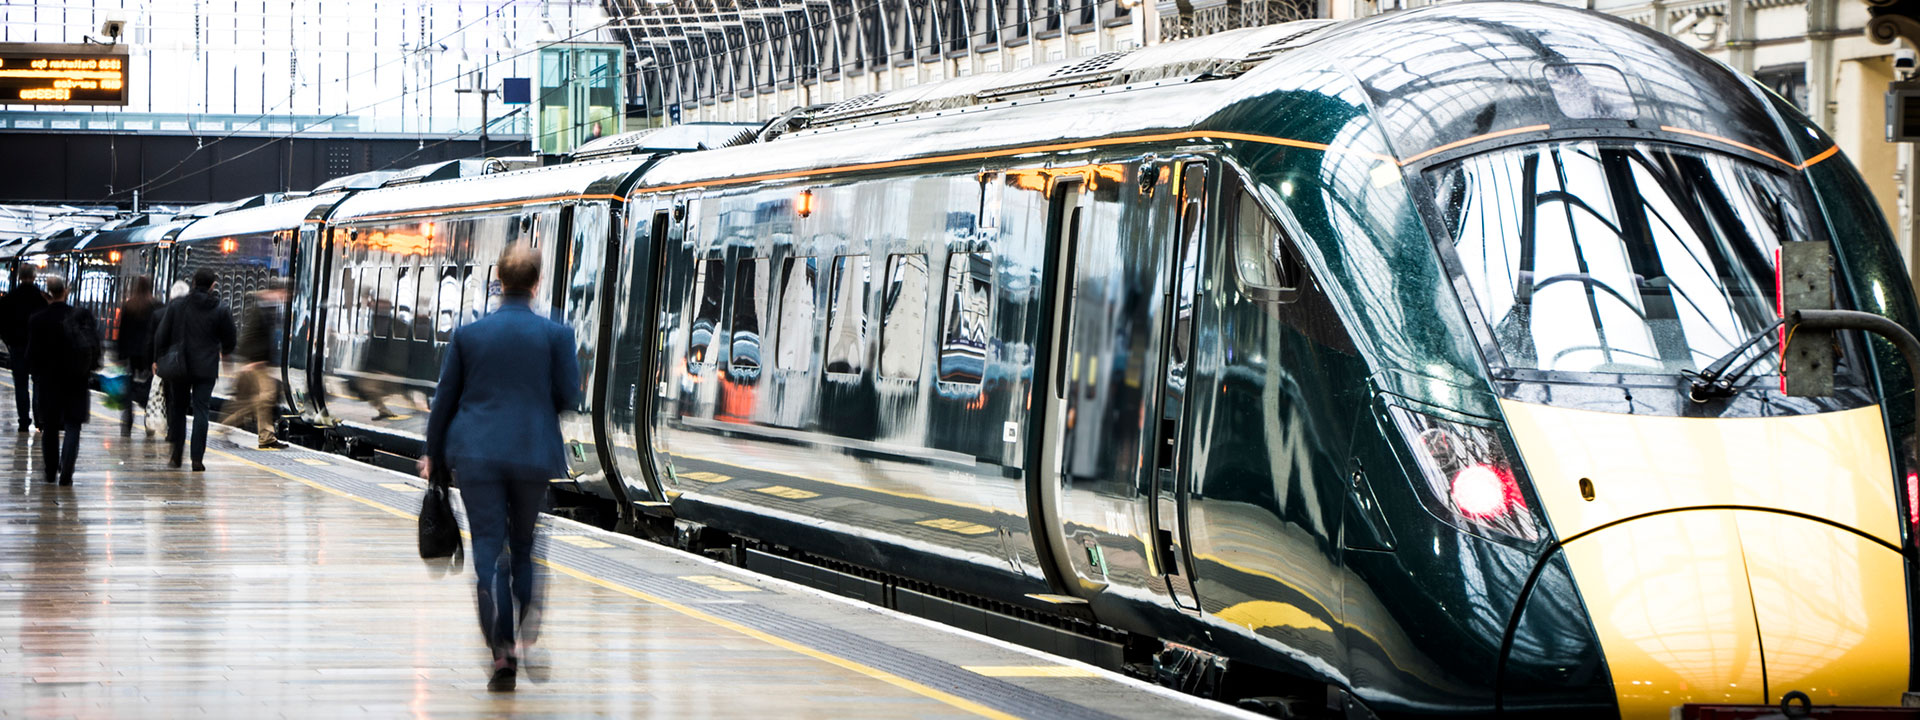 Ricardo provided Hitachi specialist advisory services - including systems engineering, RAMS, human factors and EMC - for the Bi-mode Intercity Express Train Programme